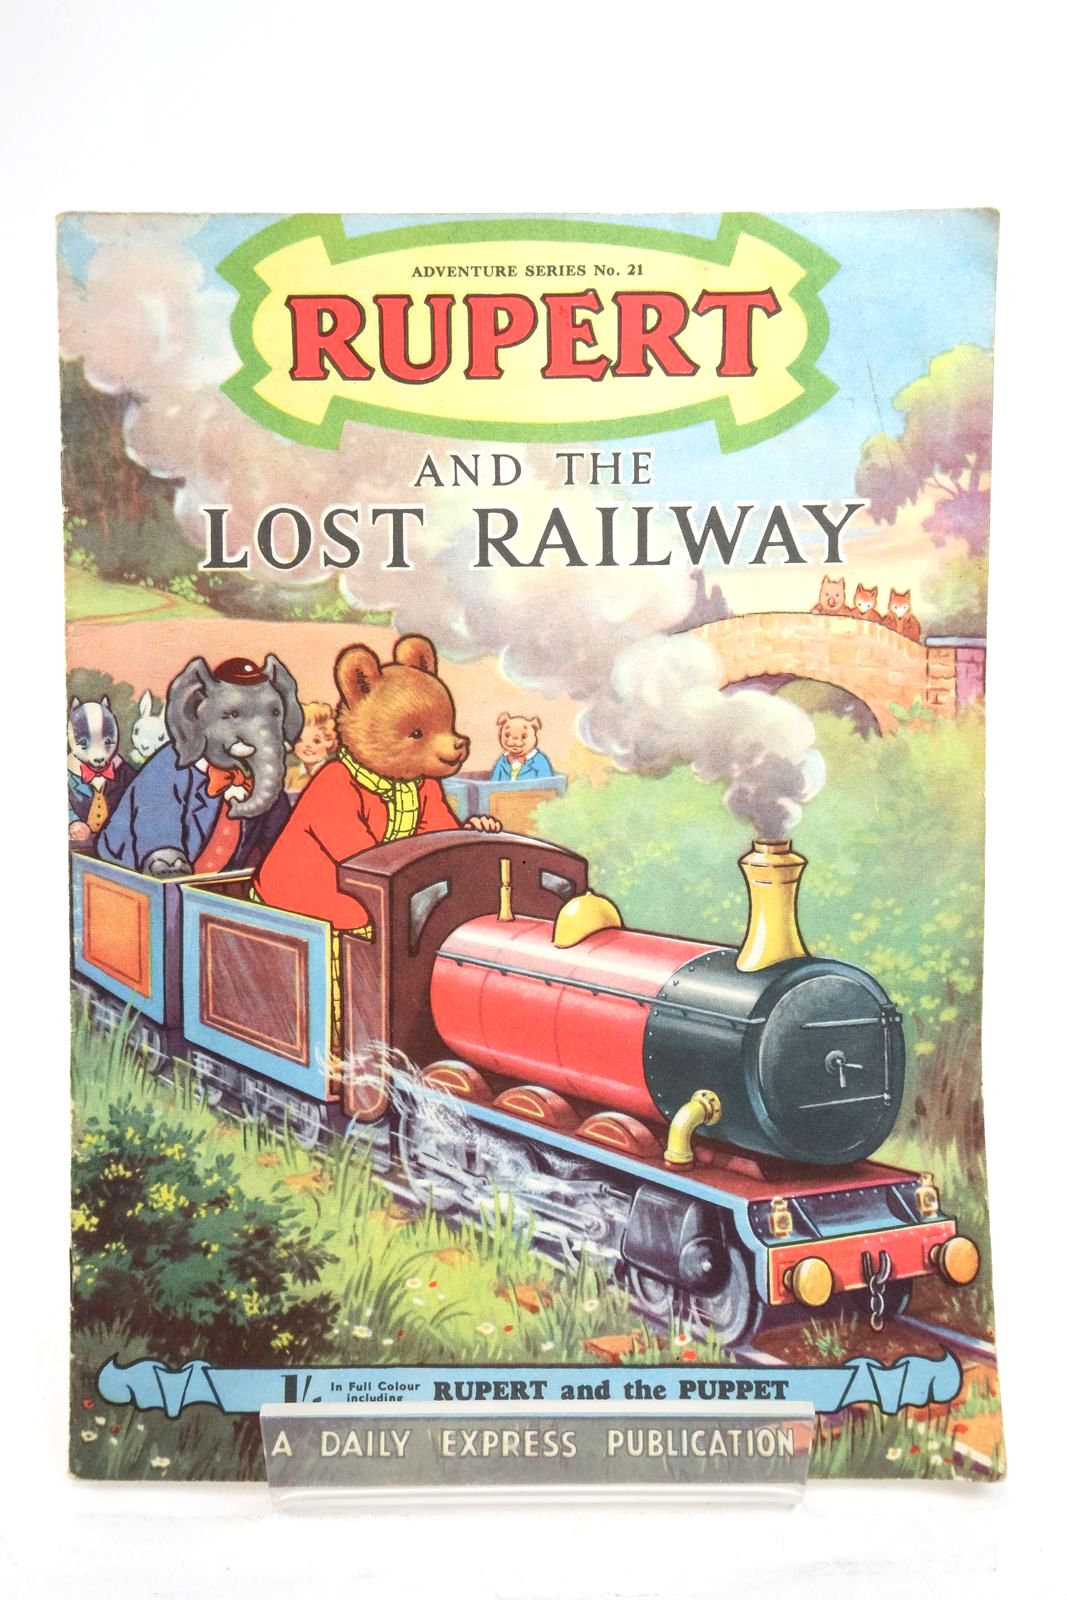 Photo of RUPERT ADVENTURE SERIES No. 21 - RUPERT AND THE LOST RAILWAY- Stock Number: 2137193